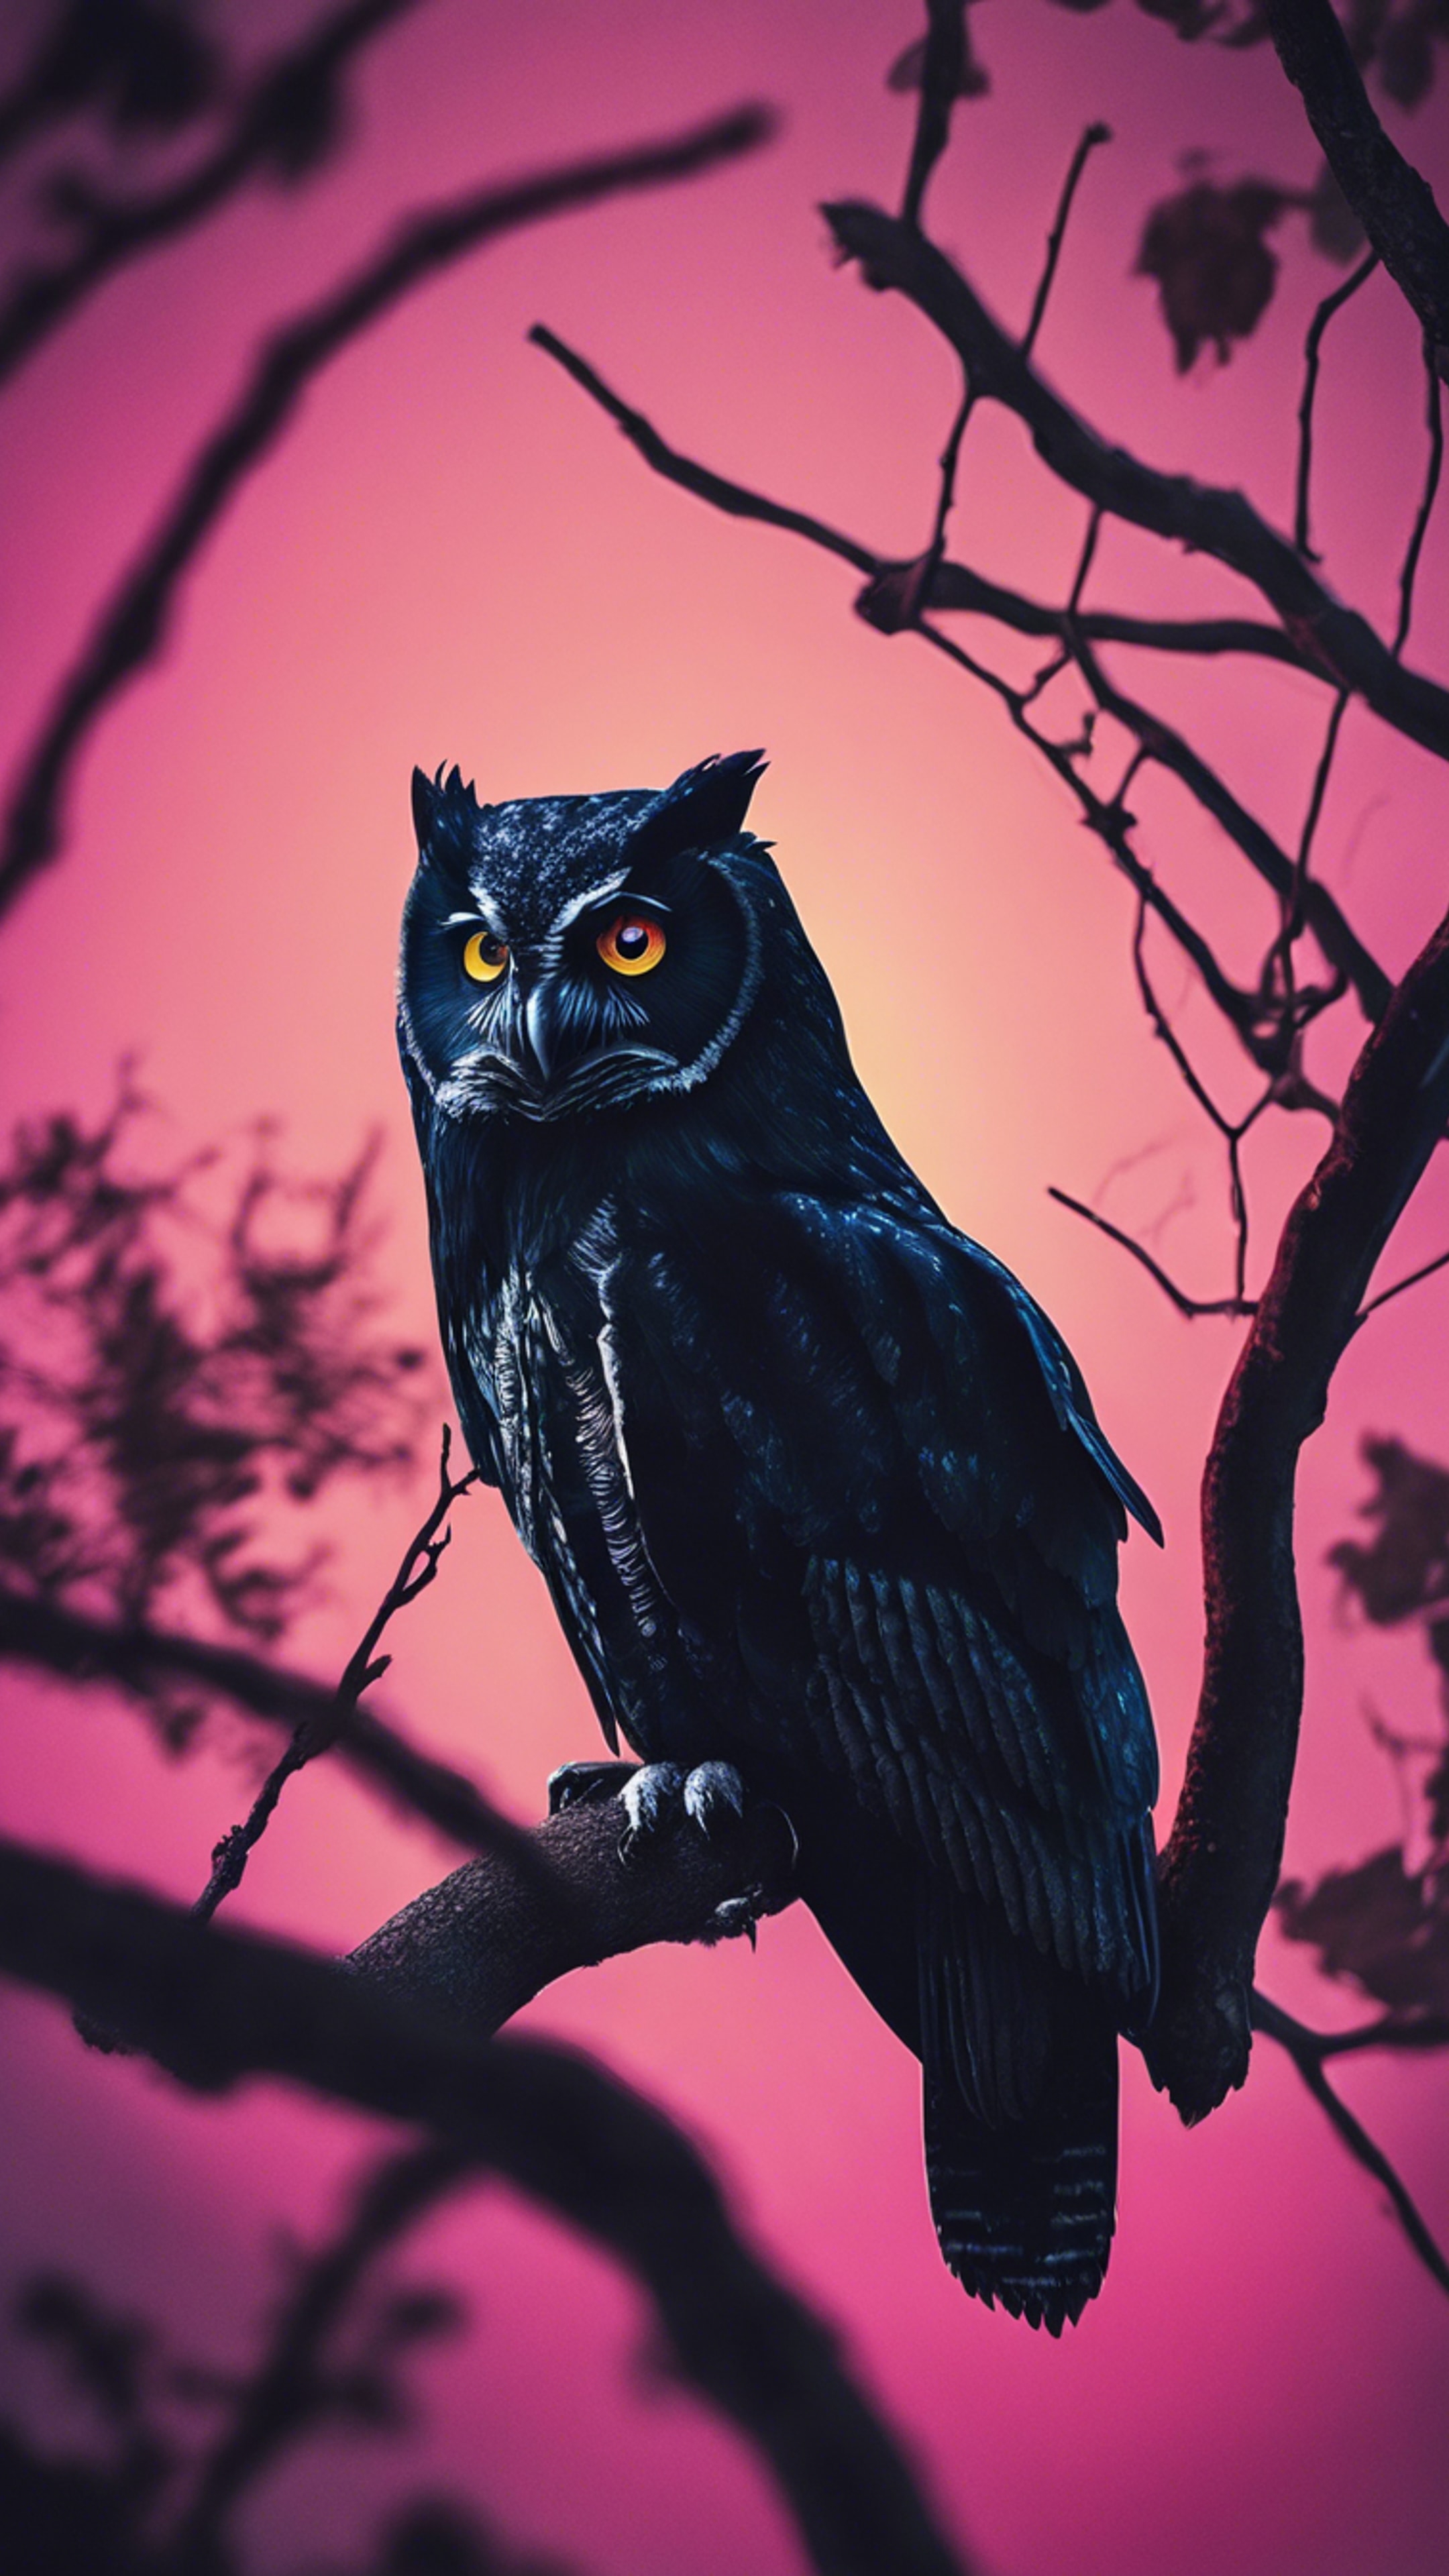 A pitch black owl, its eyes glowing in cool neon colors, perched on a tree branch on a moonless night. Tapéta[de9c9fccdafb4c81814c]